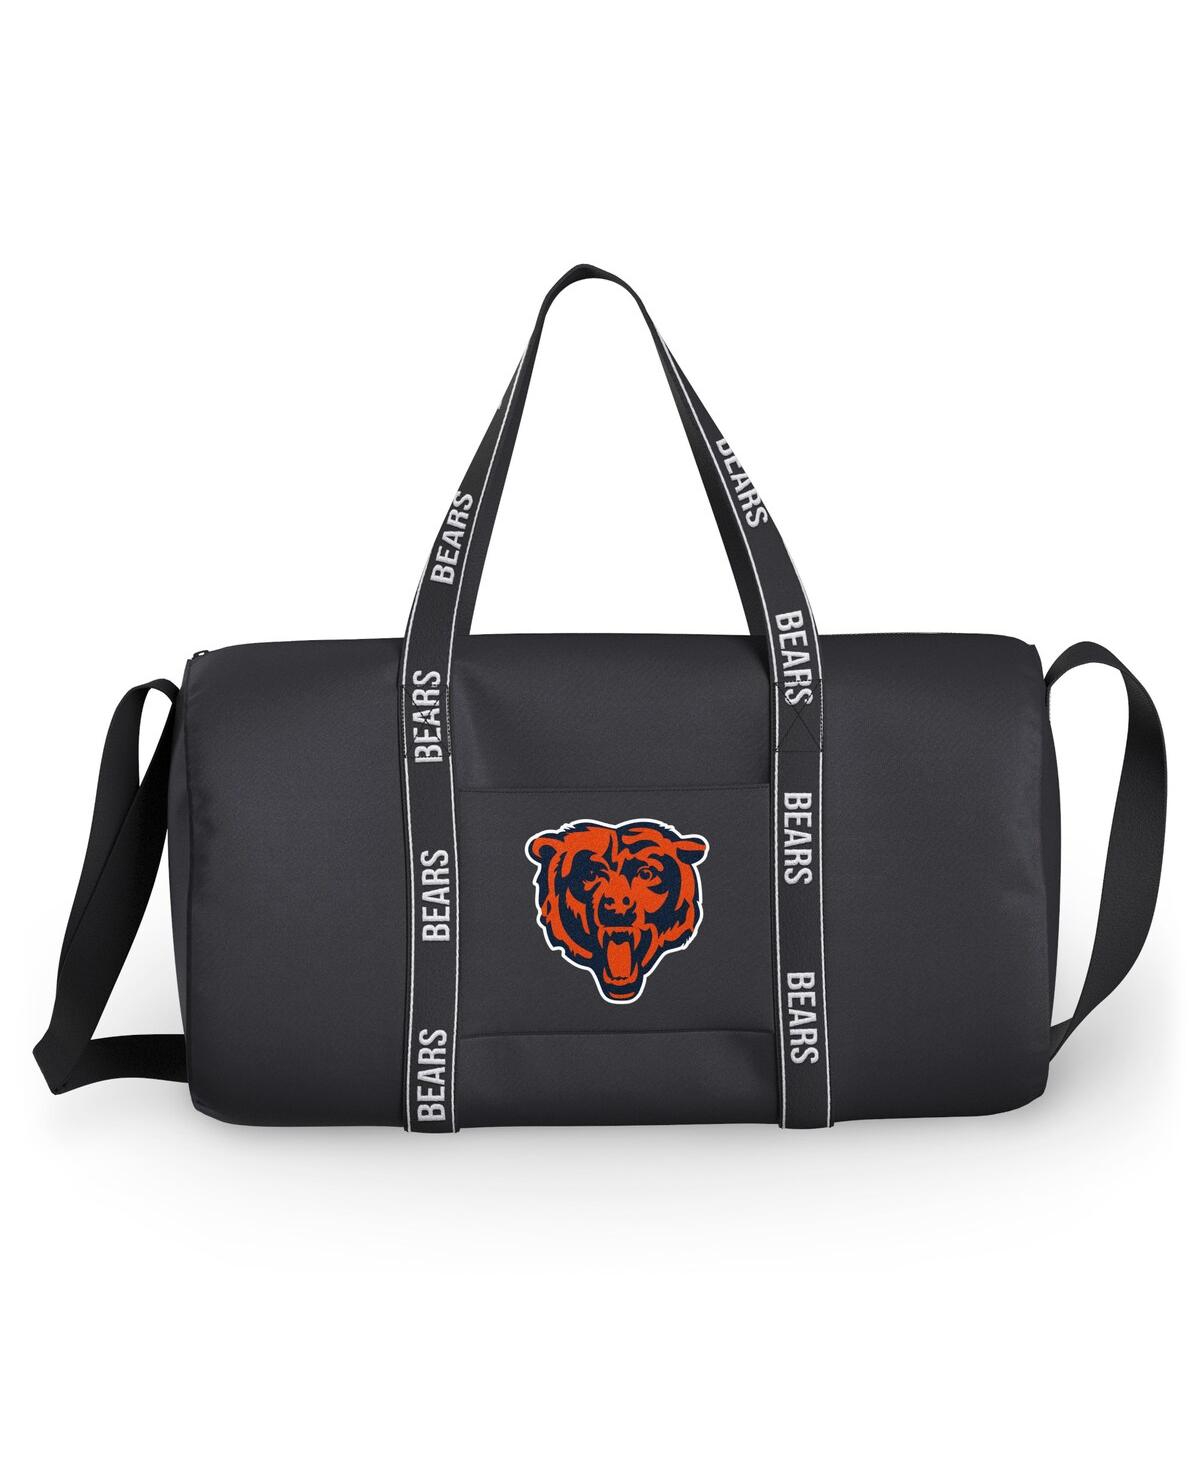 Men's and Women's Wear by Erin Andrews Chicago Bears Gym Duffle Bag - Black